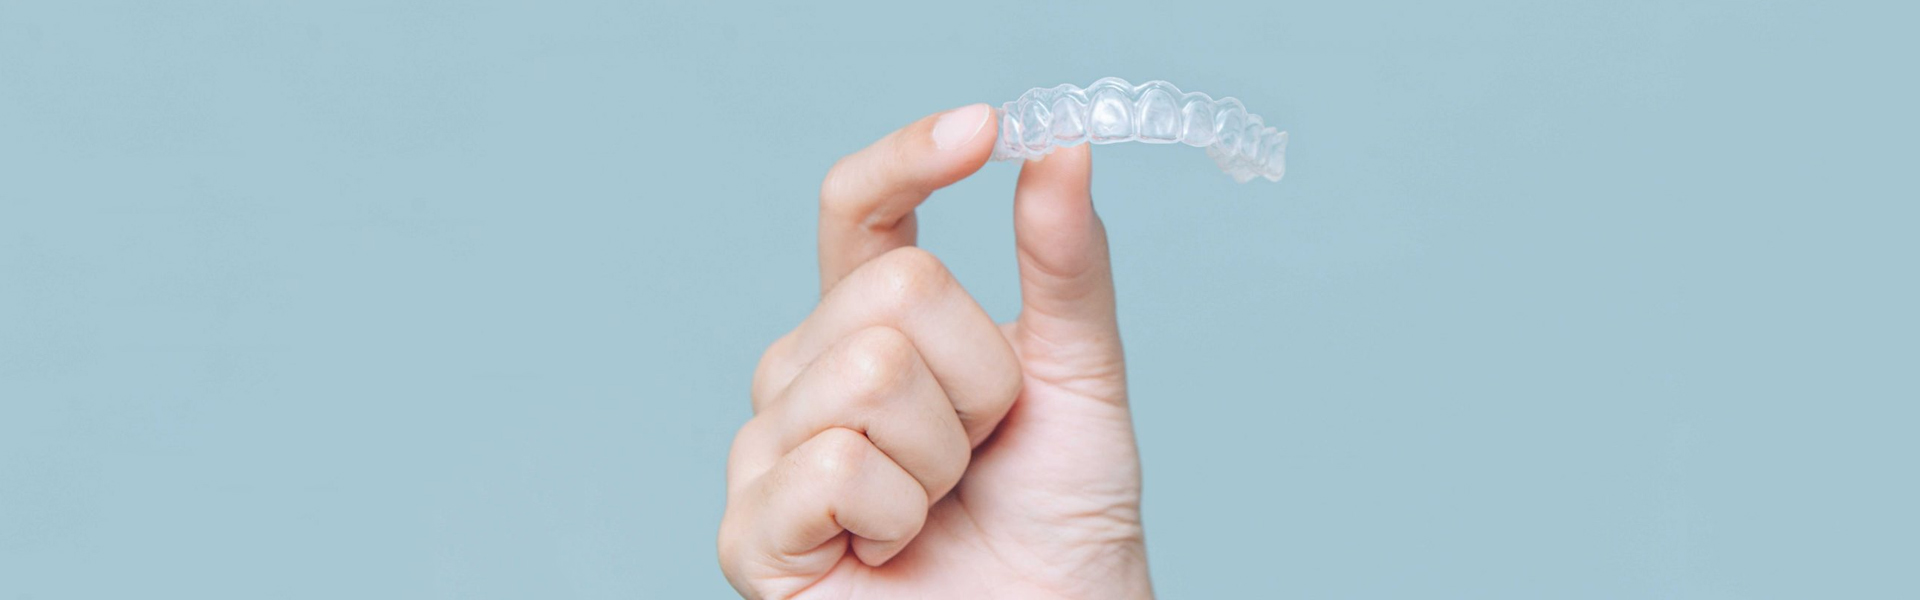 Invisalign Helps to Straighten Teeth without Embarrassment